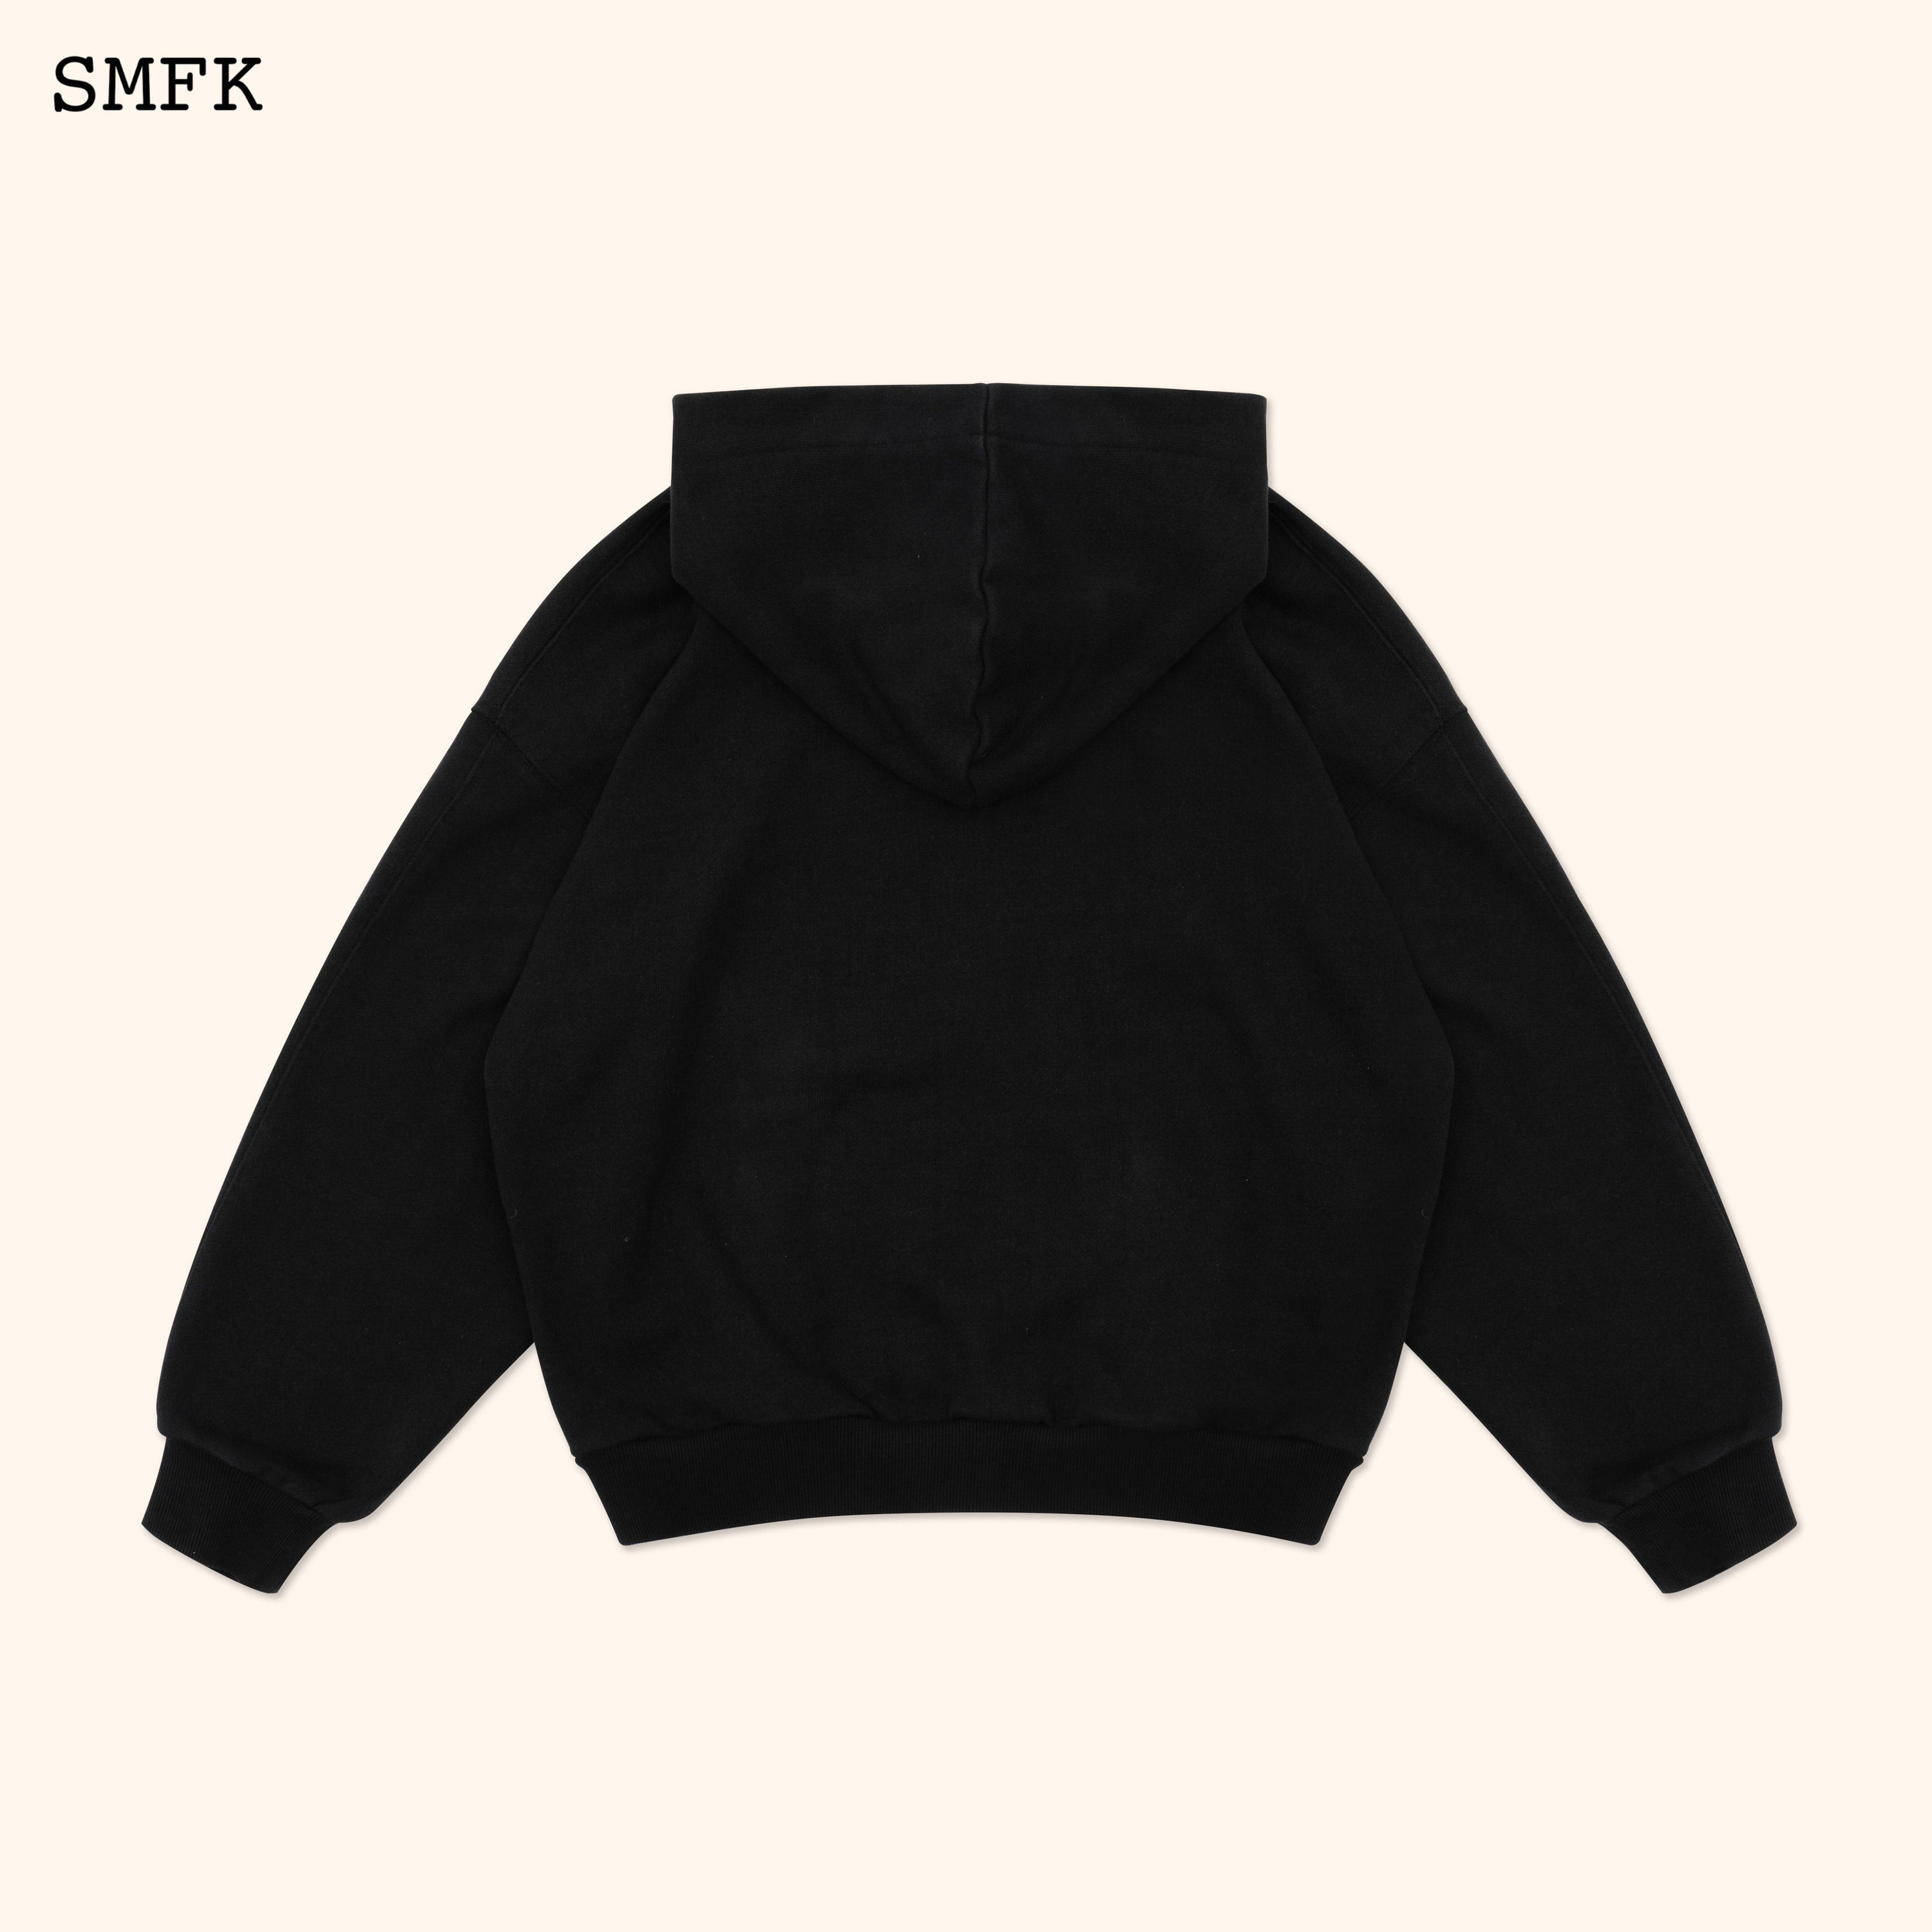 Compass Classic Cross Hoodie Black Jacket - SMFK Official